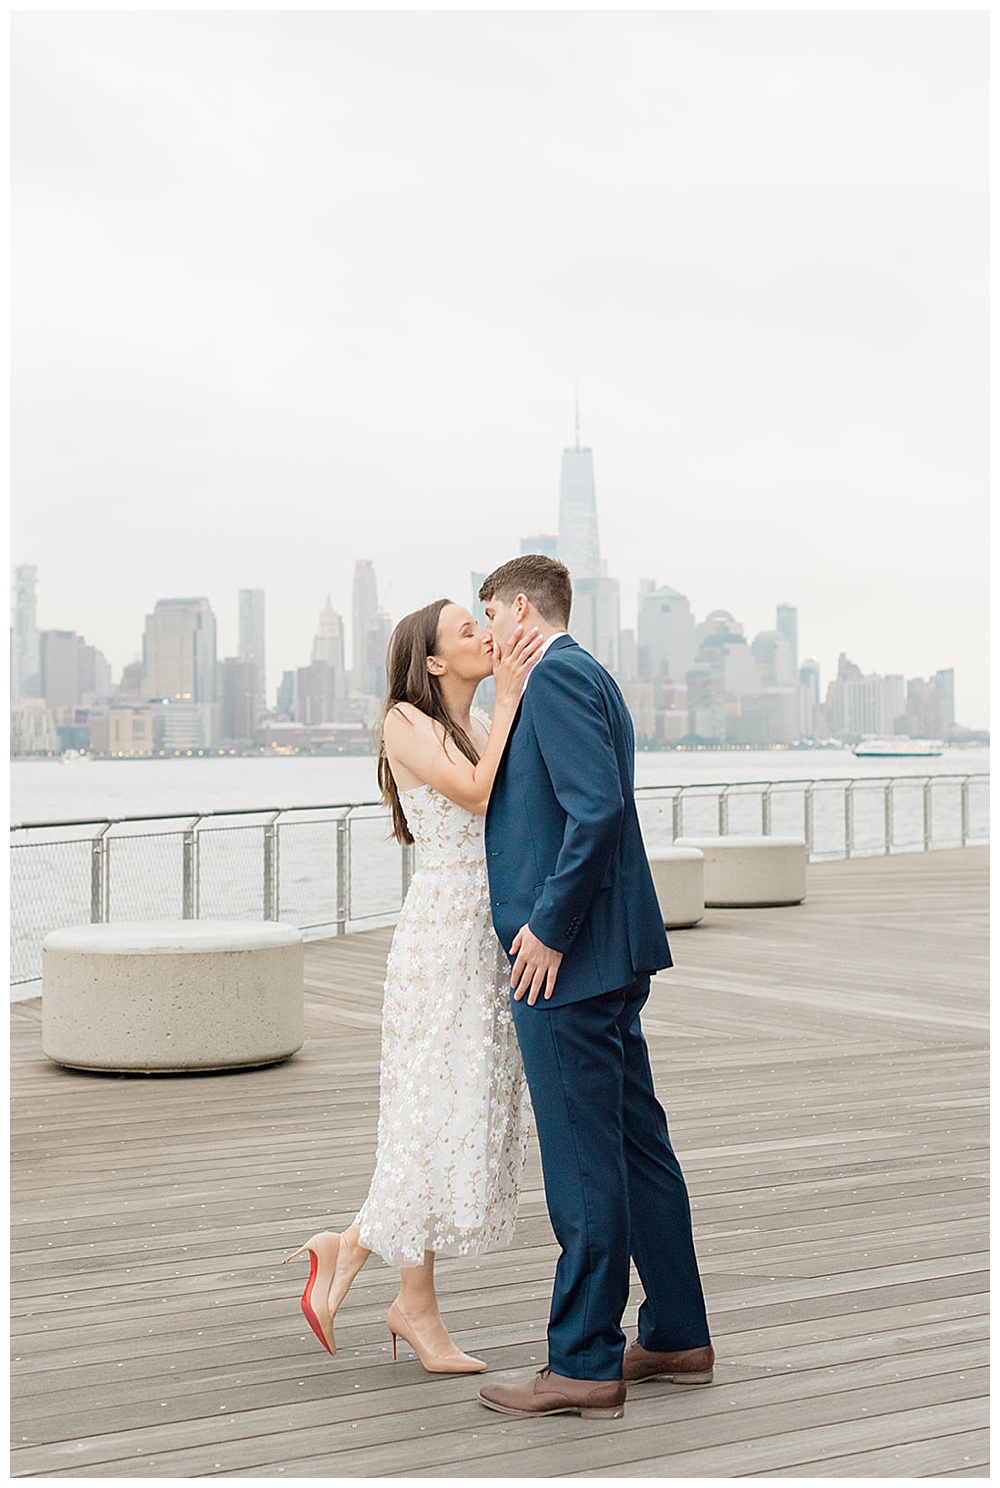 Expert Tips On Engagement Photo Outfits & More- Lulus.com Fashion Blog